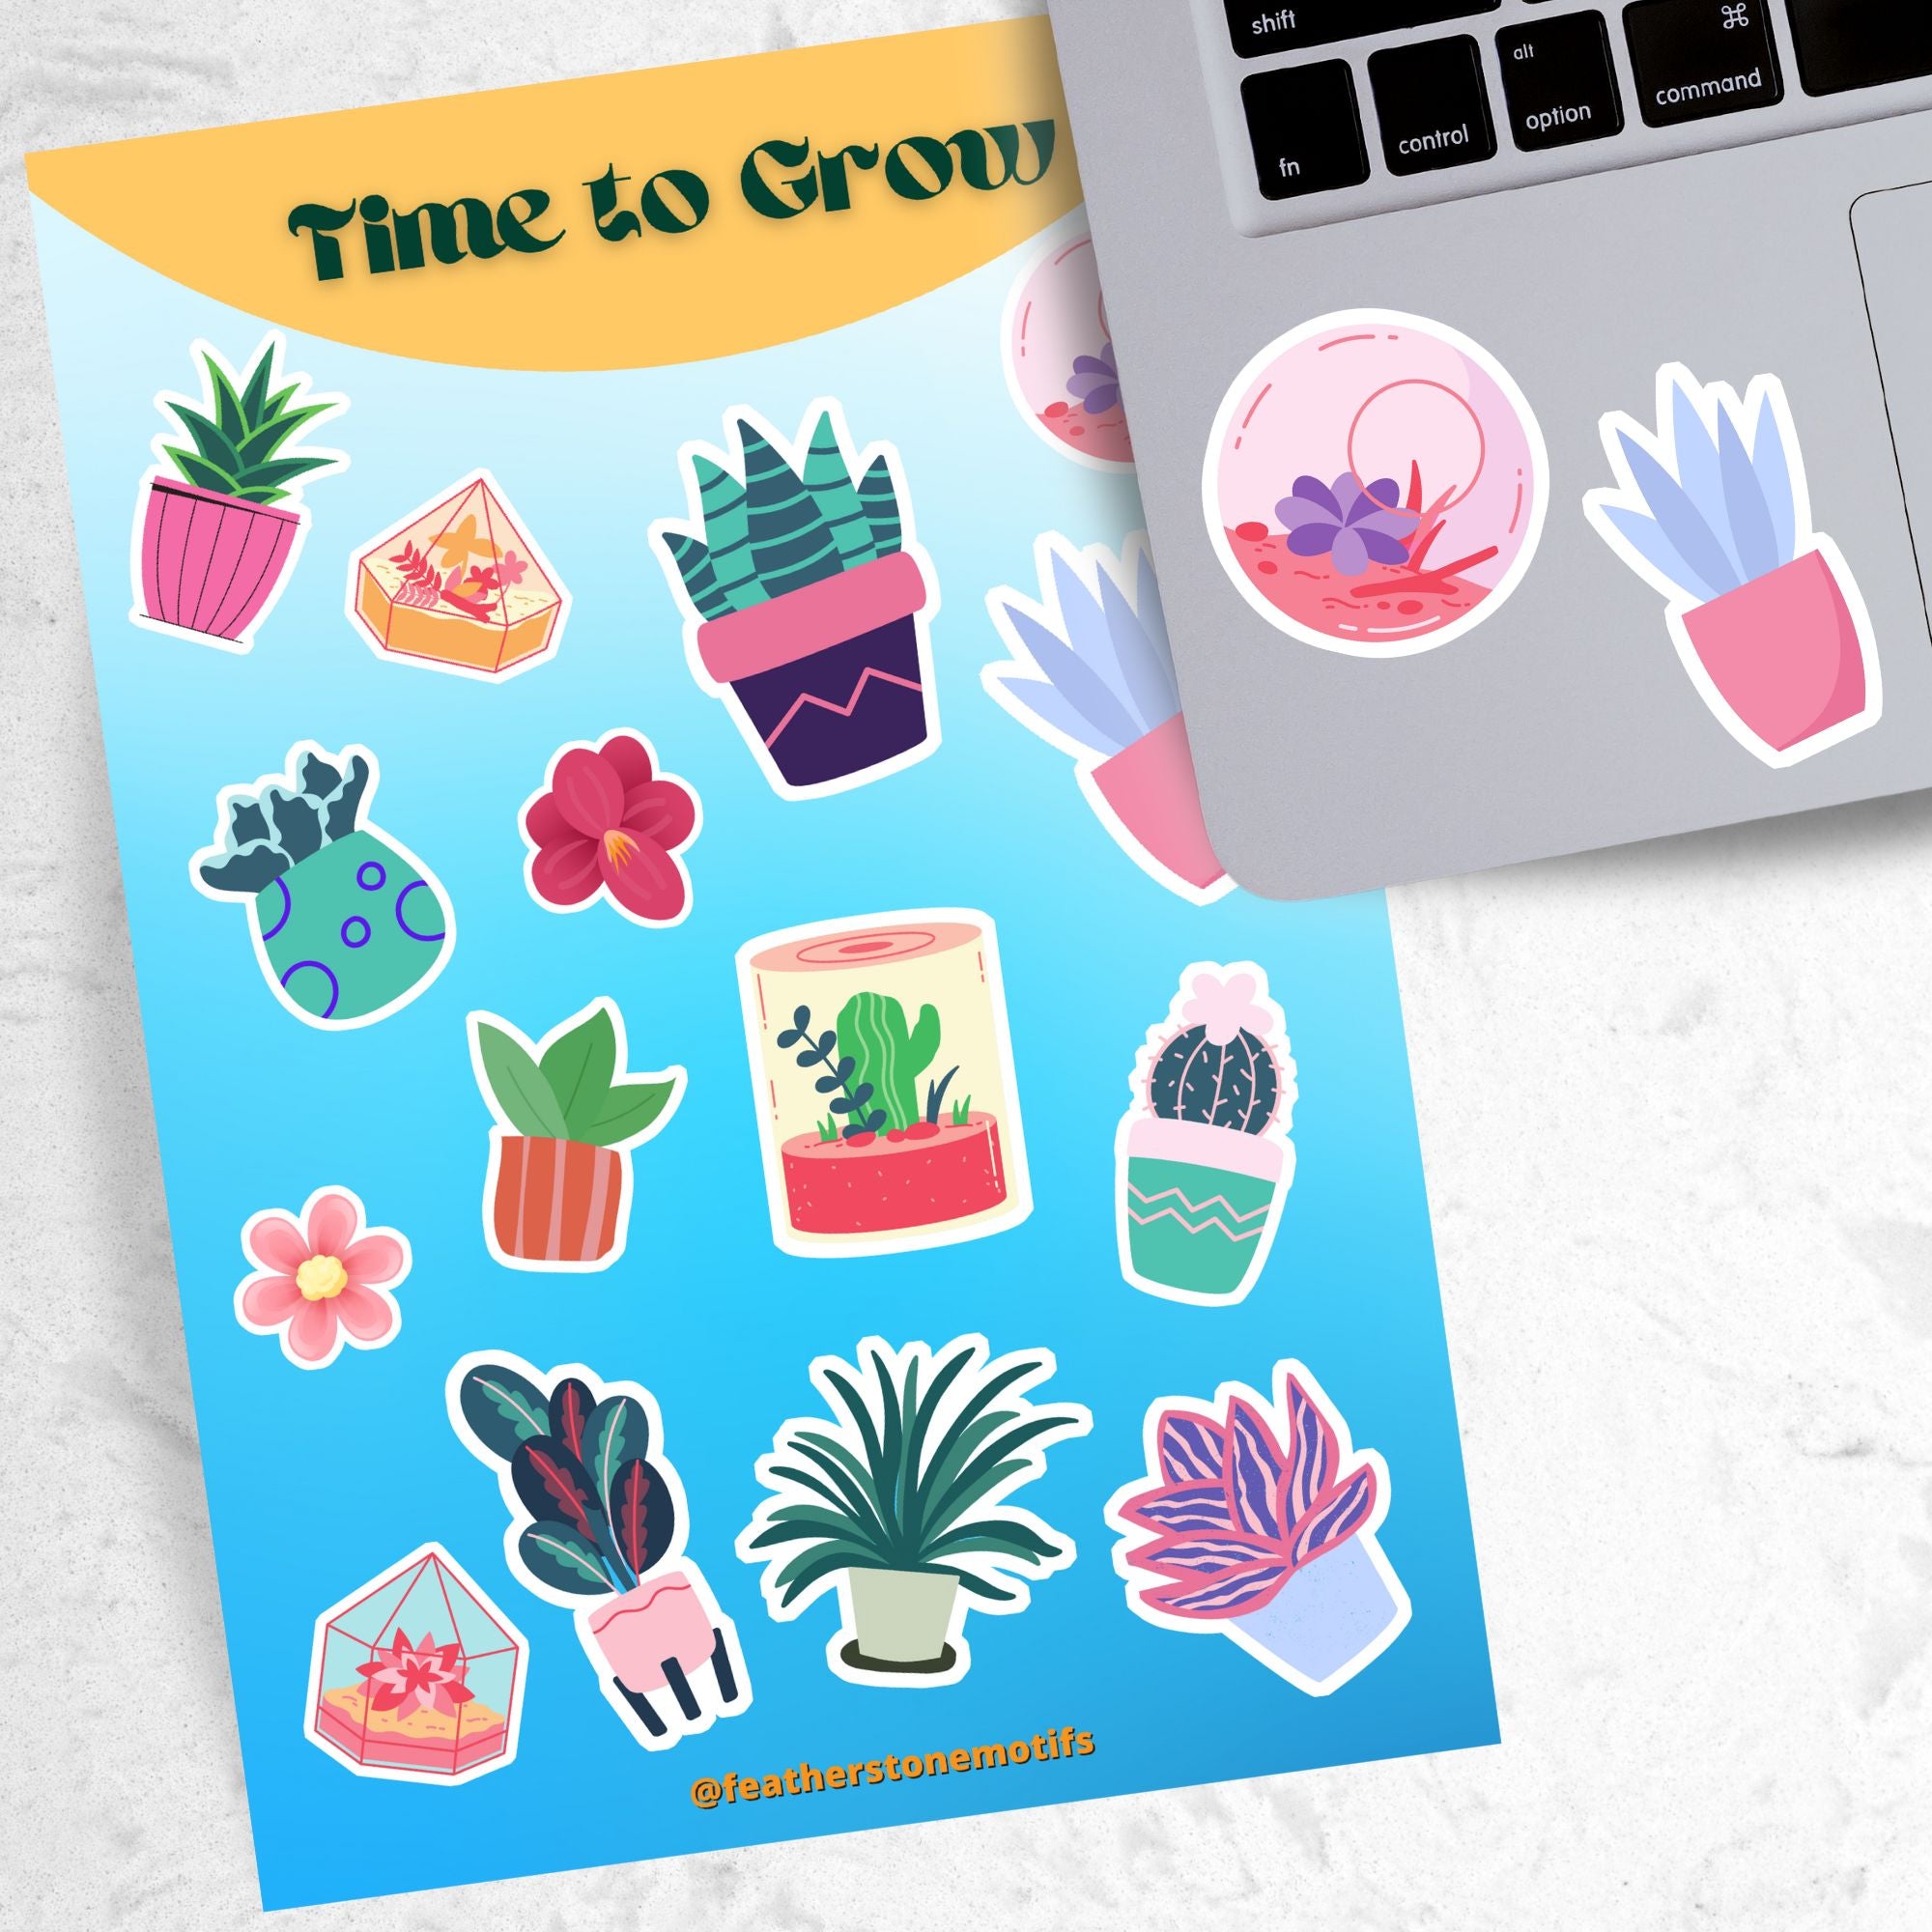 Let your green thumb shine with this sticker sheet. It features a variety of succulent plant stickers that are perfect for your favorite gardener! This image shows the sticker sheet next to an open laptop with a round terrarium sticker and a potted succulent plant sticker, both in pastel colors, applied below the keyboard..